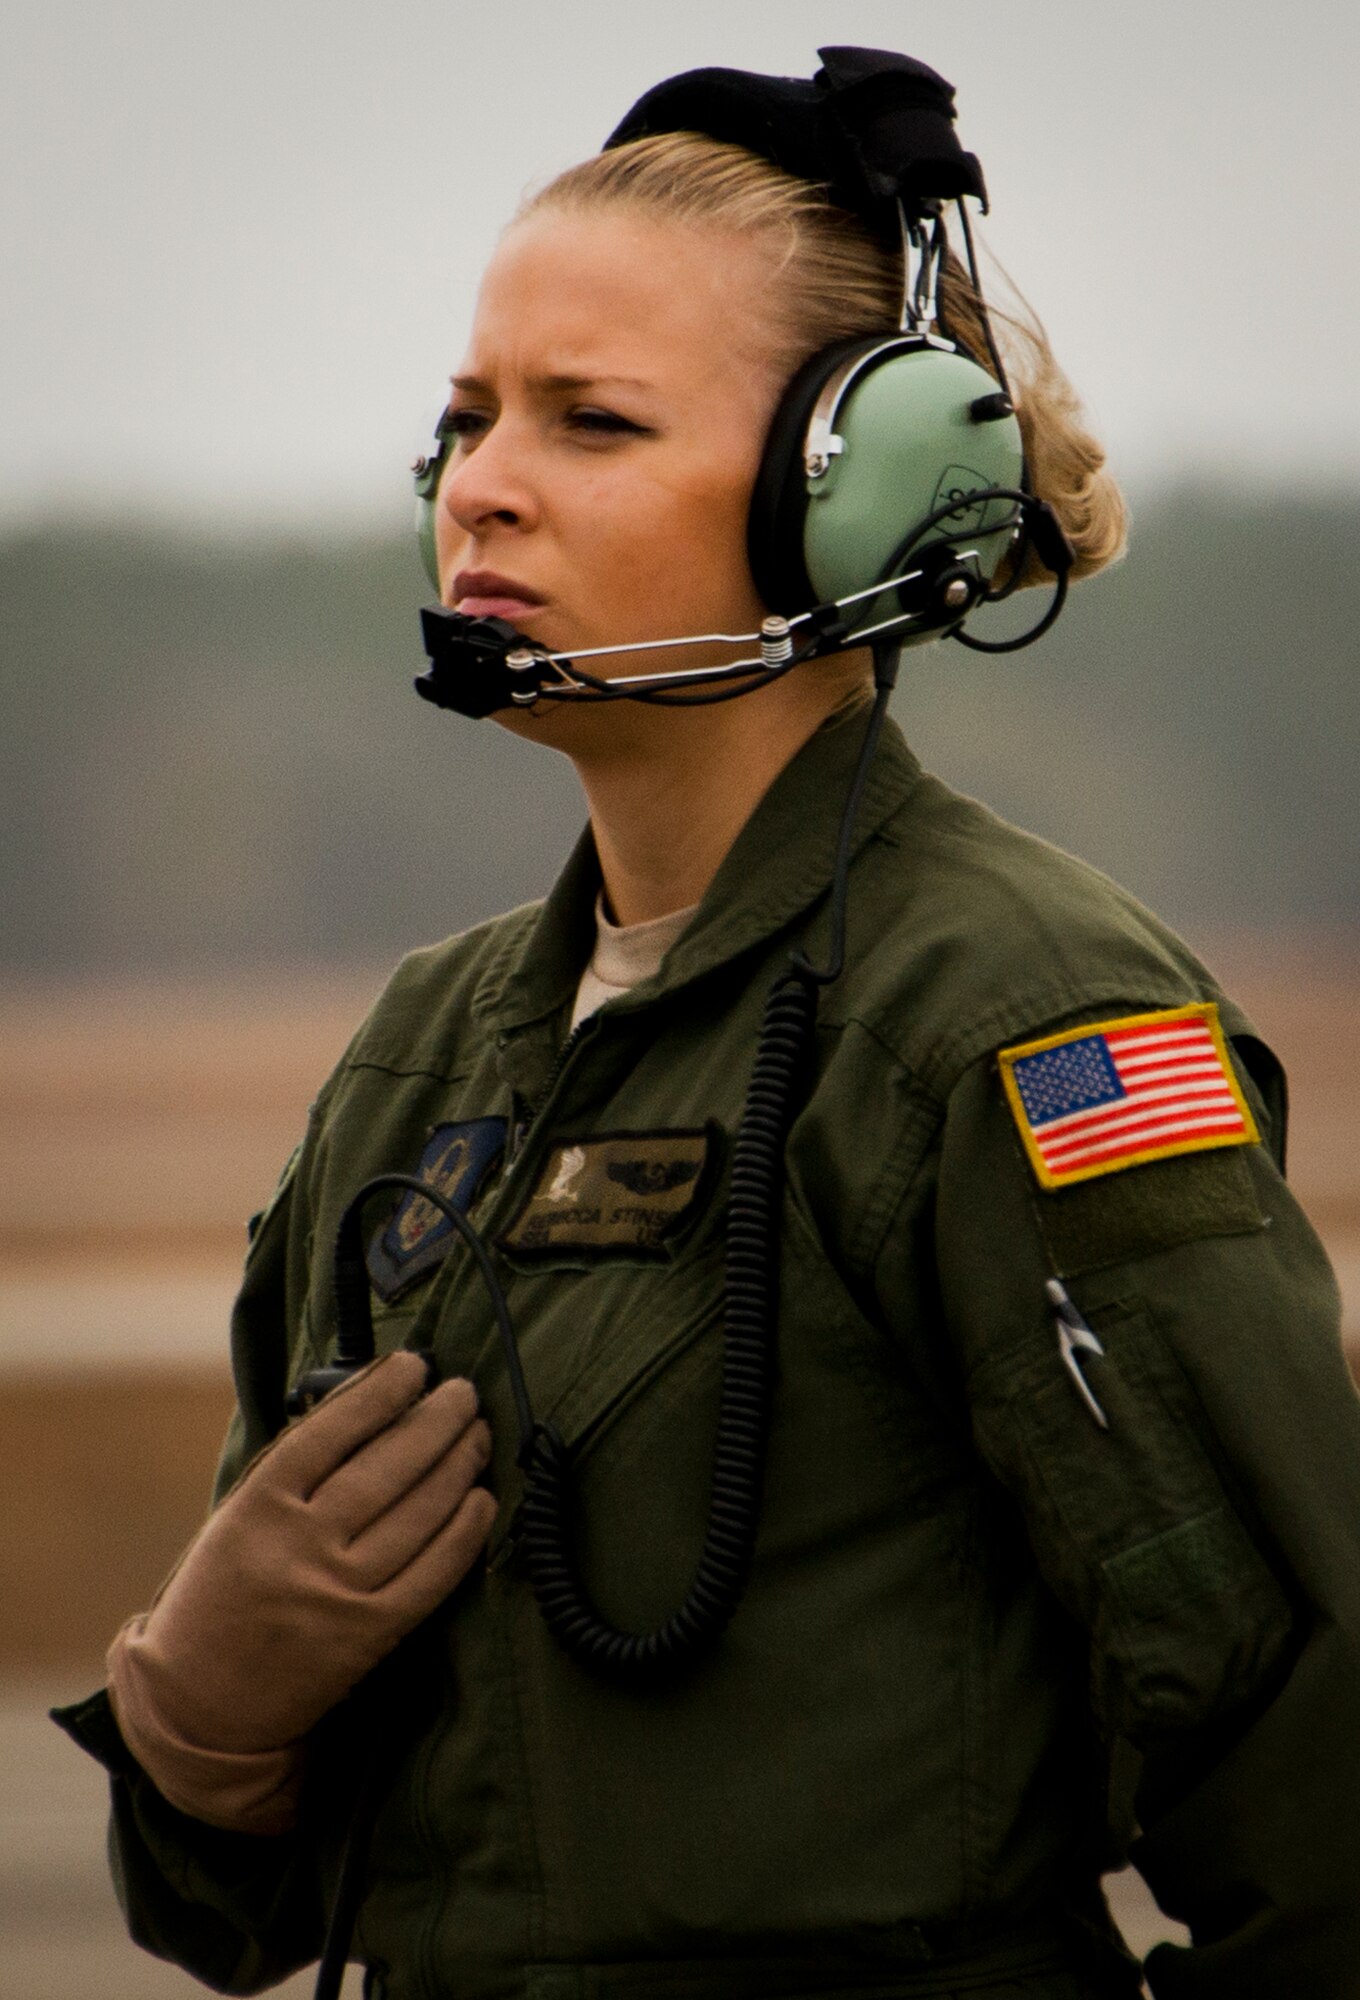 Senior Airman Rebecca Stinson, a loadmaster with the 711th Special Operations Squadron, talks with the aircrew during preflight checks before an MC-130E Combat Talon I sortie at Duke Field, Fla.  There are only five Talons left at the special operations reserve base.  The 919th has begun remissioning to the Aviation Foreign Internal Defense aircraft, the C-145 Skytruck.  (U.S. Air Force photo/Tech. Sgt. Samuel King Jr.)